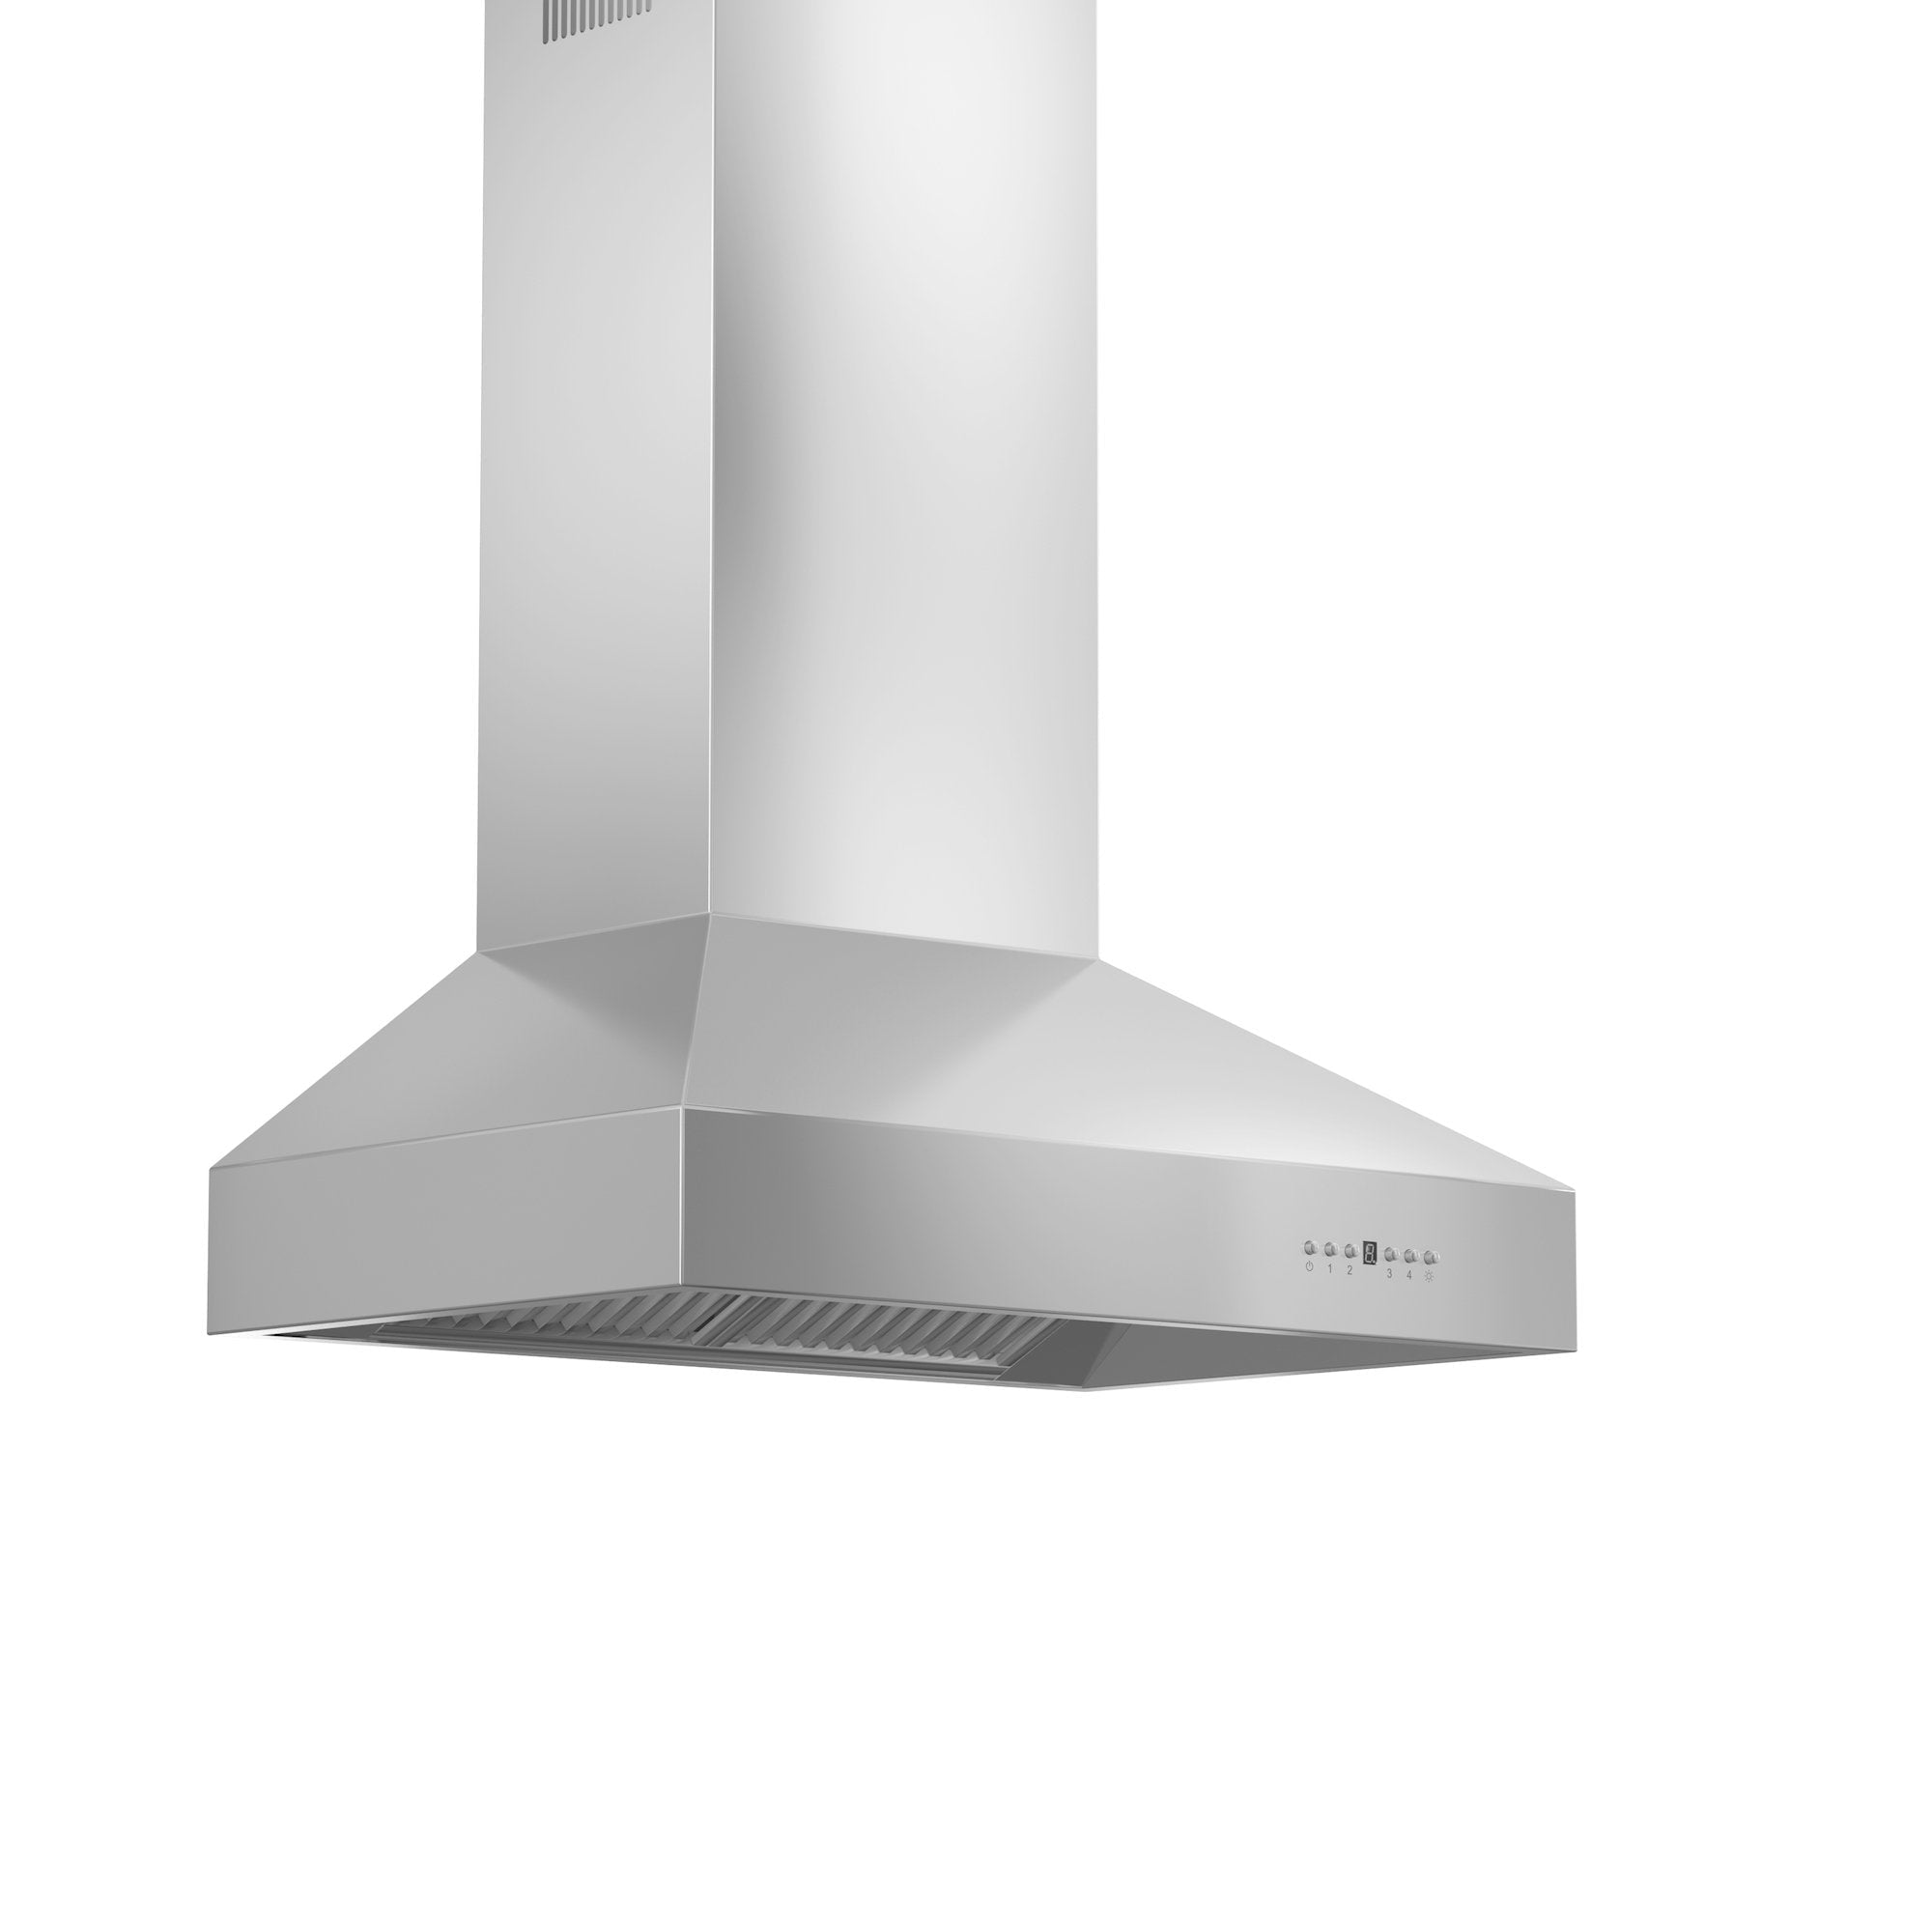 ZLINE Ducted Wall Mount Range Hood in Outdoor Approved Stainless Steel (697-304).